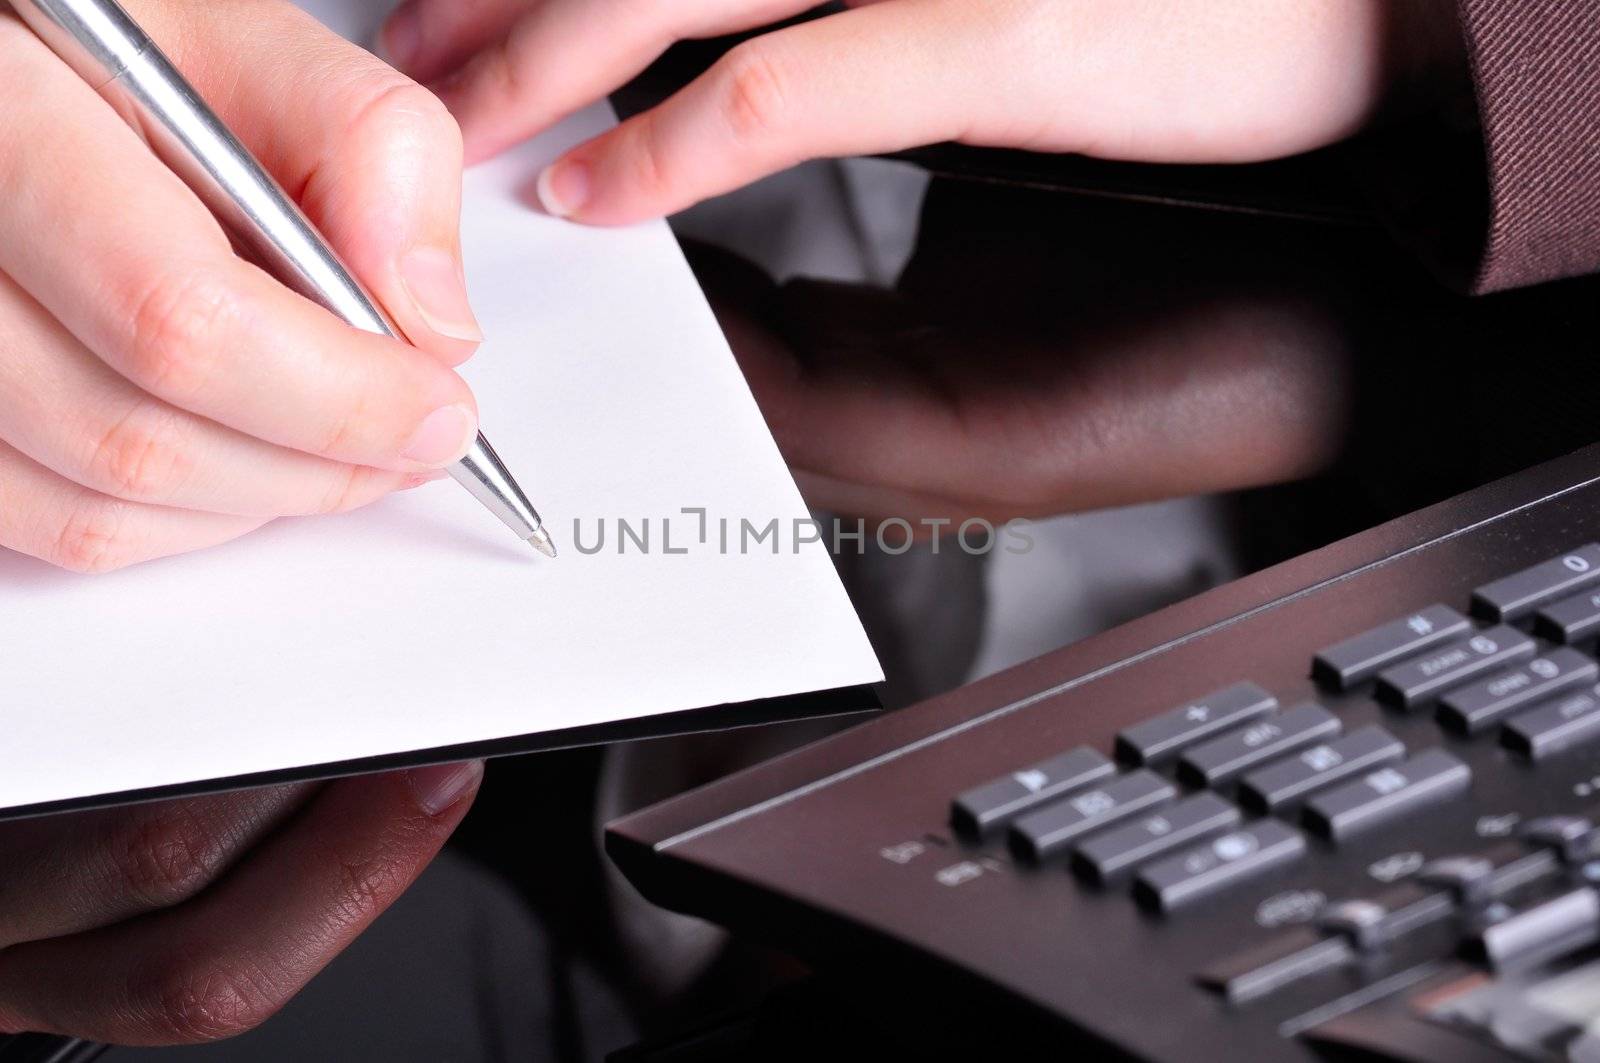 A hand, holding a pen, is ready to write on a document with a telephone next to it.